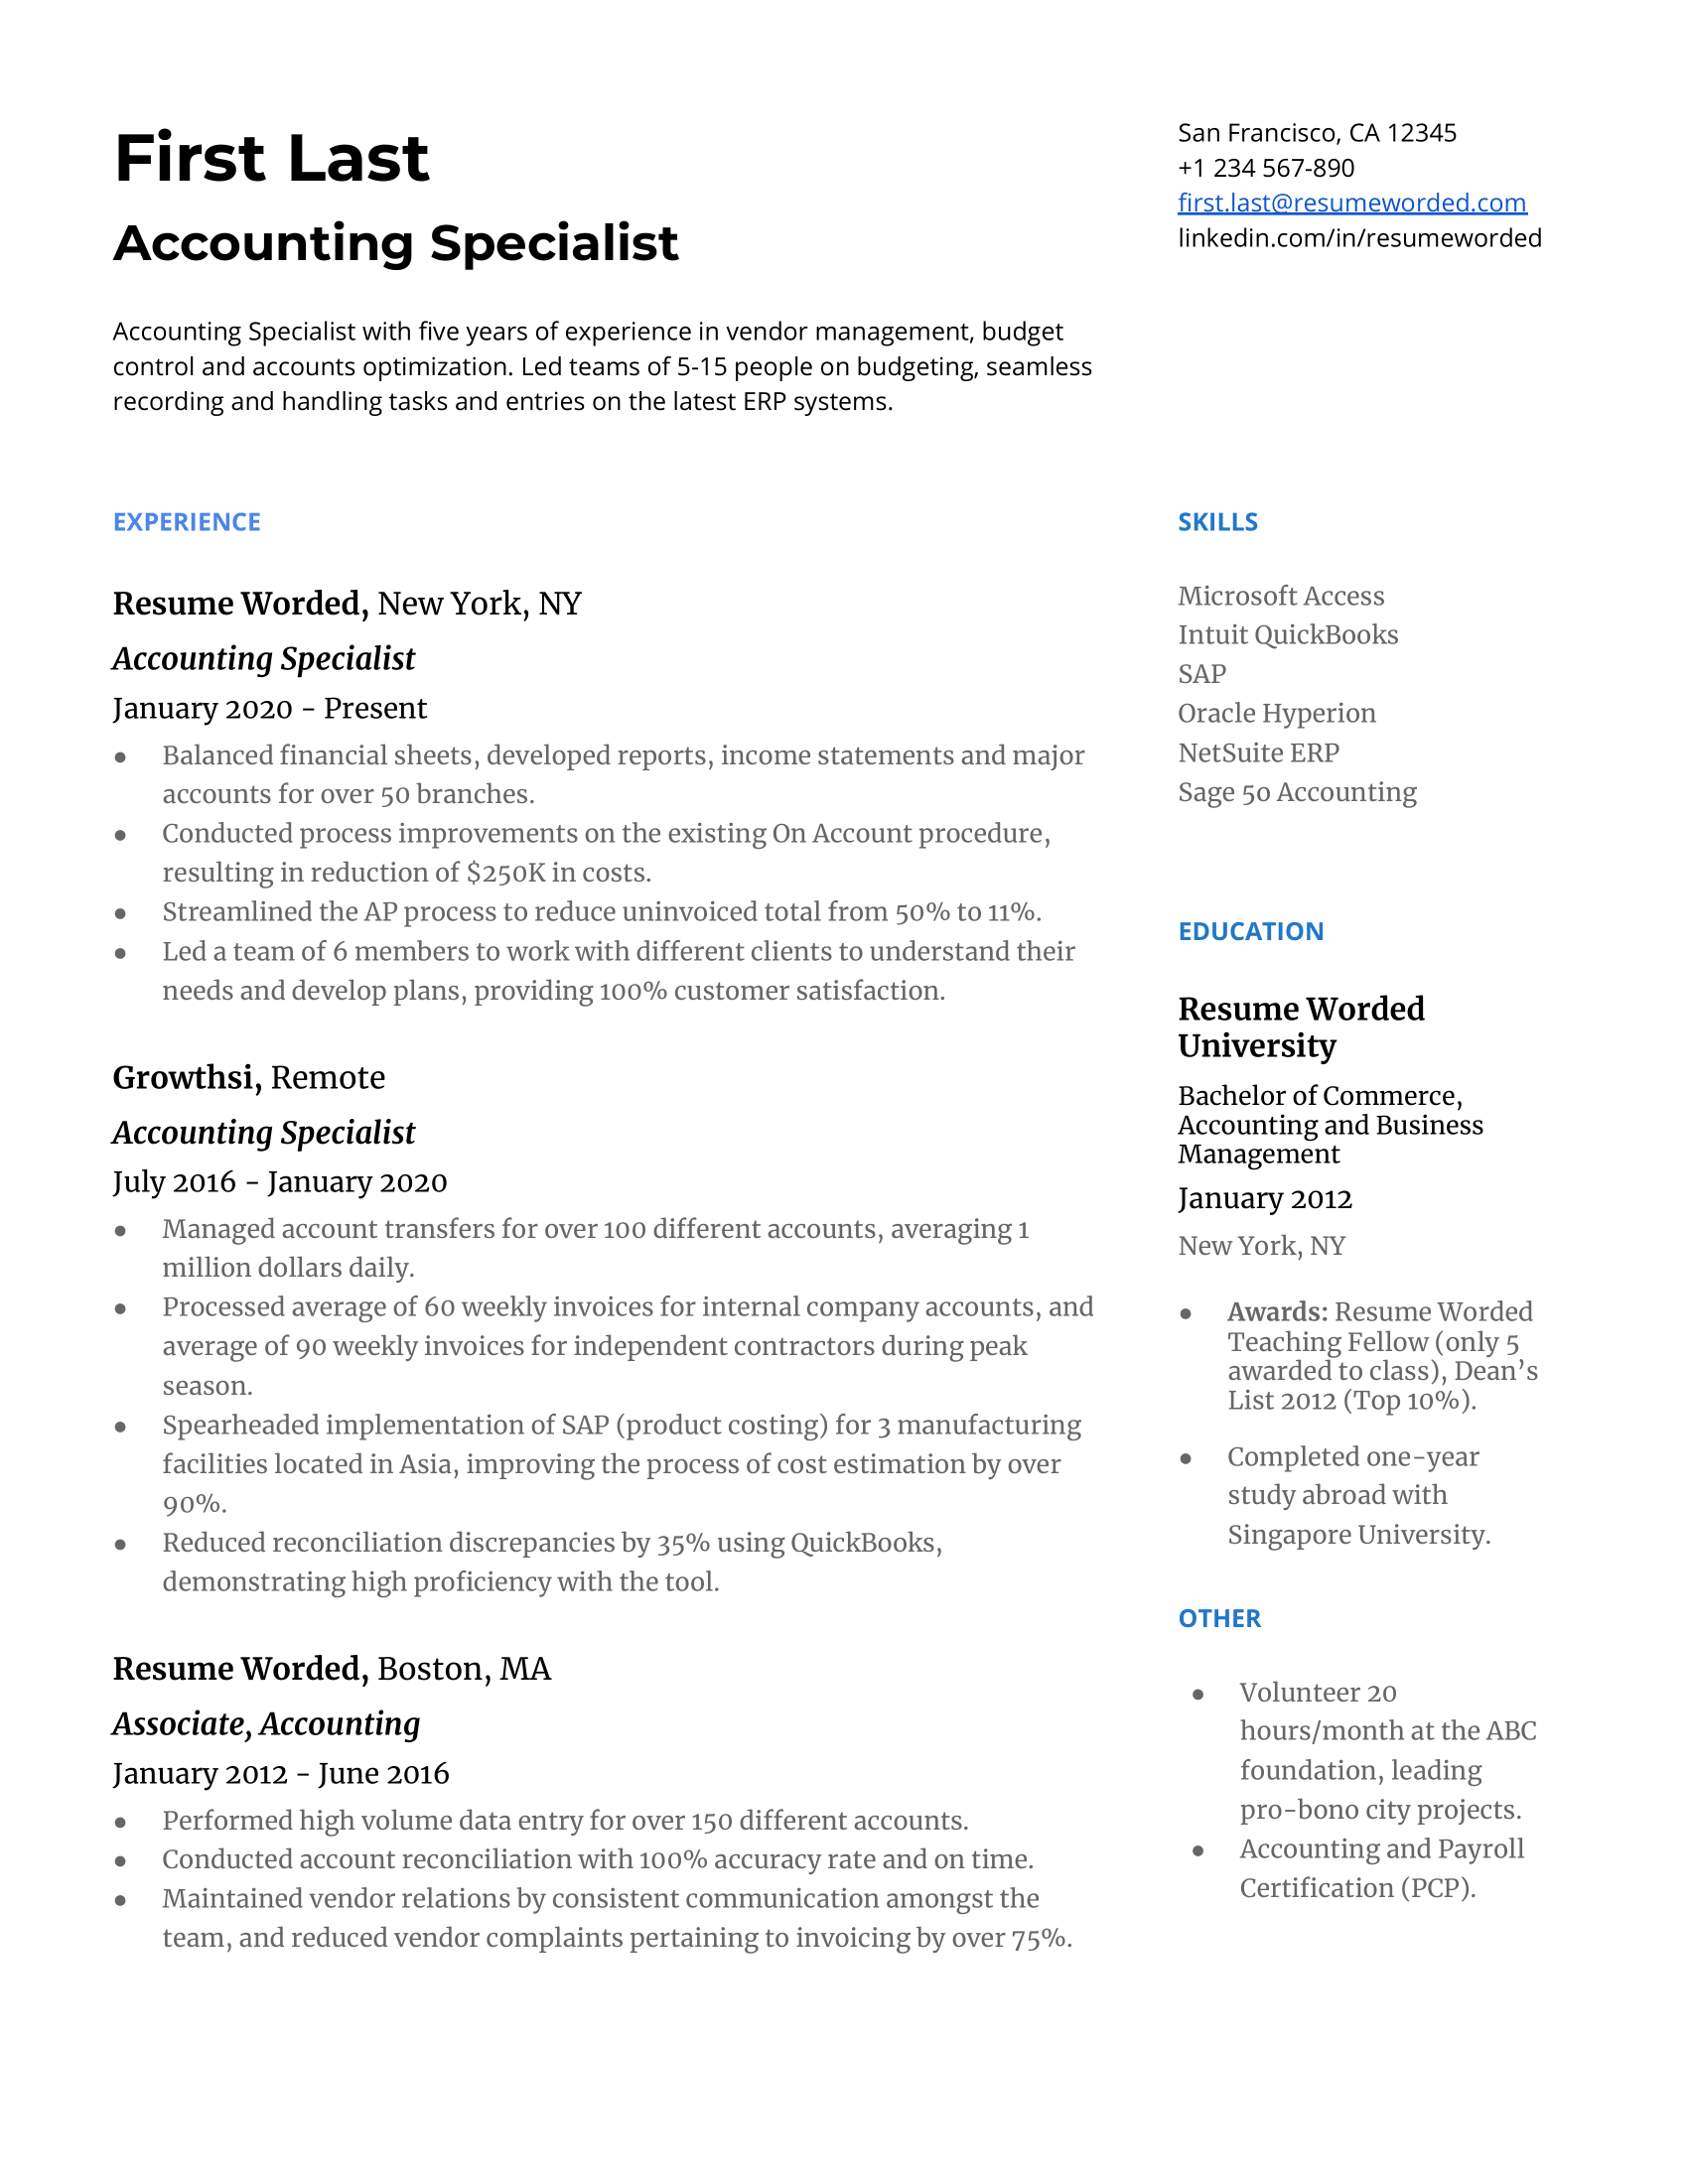 An example of a well-structured resume for an Accounting Specialist role.